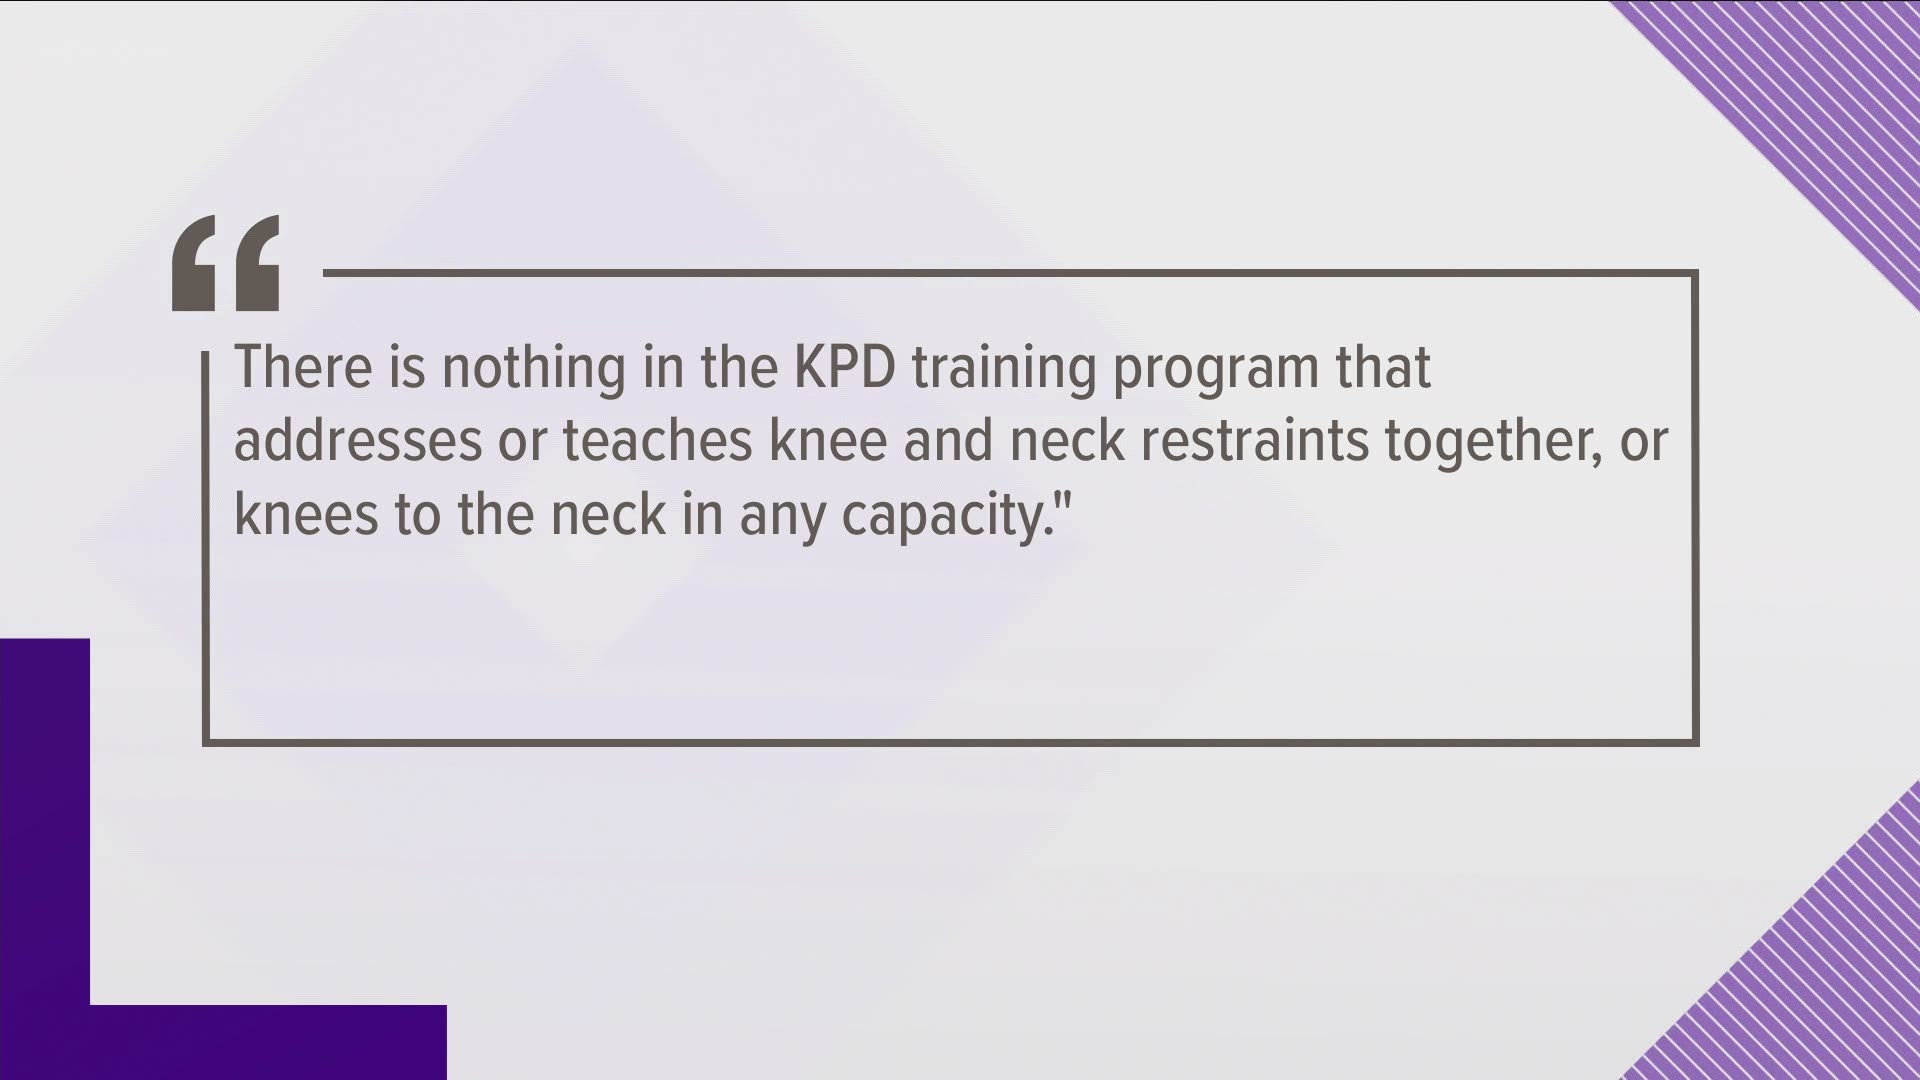 The department noted there are various training techniques involving the knee, but none to the neck.